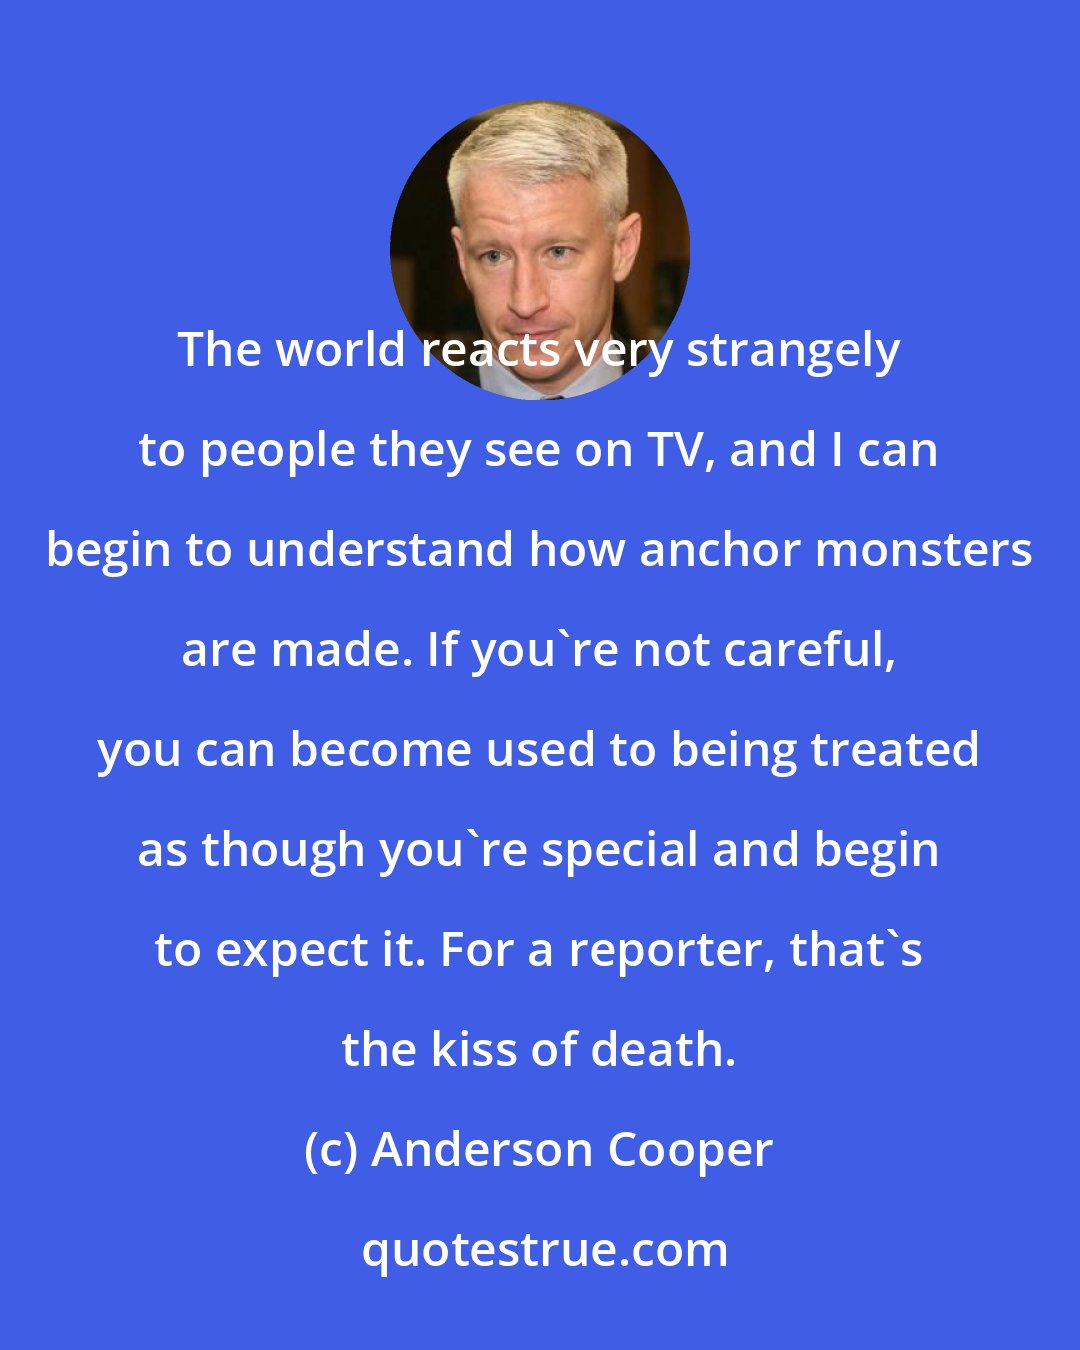 Anderson Cooper: The world reacts very strangely to people they see on TV, and I can begin to understand how anchor monsters are made. If you're not careful, you can become used to being treated as though you're special and begin to expect it. For a reporter, that's the kiss of death.